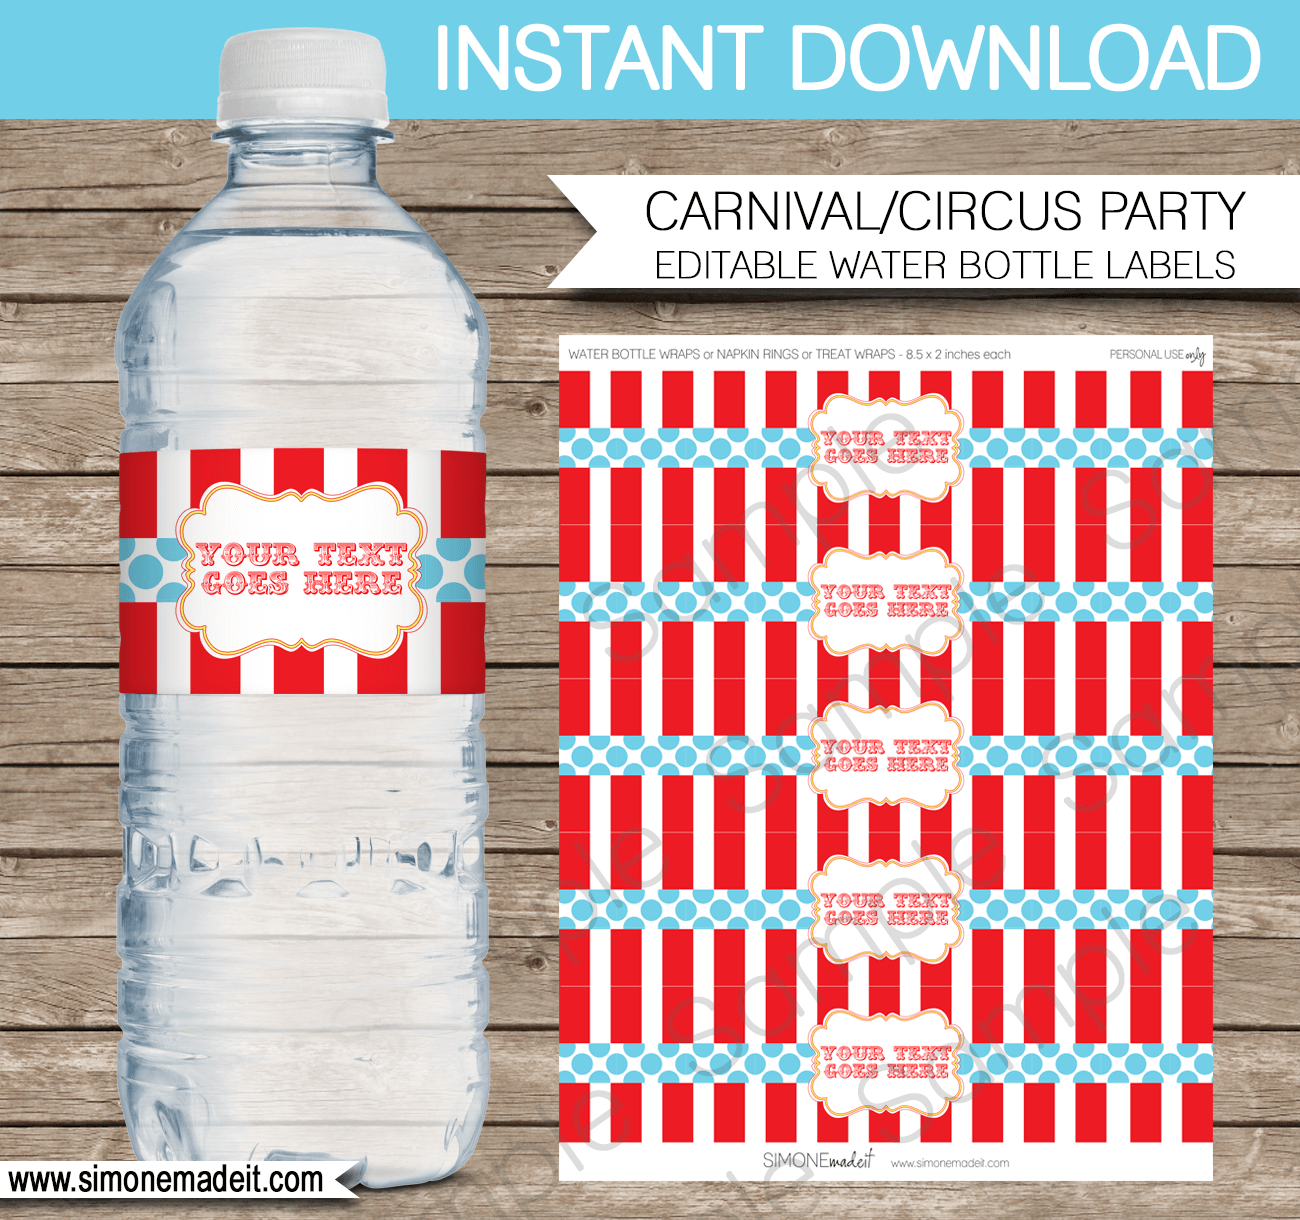 Editable Circus Water Bottle Labels | Red Aqua | Carnival Party | Circus  Party | Printable Decorations | DIY Template | $3.00 INSTANT DOWNLOAD via SIMONEmadeit.com